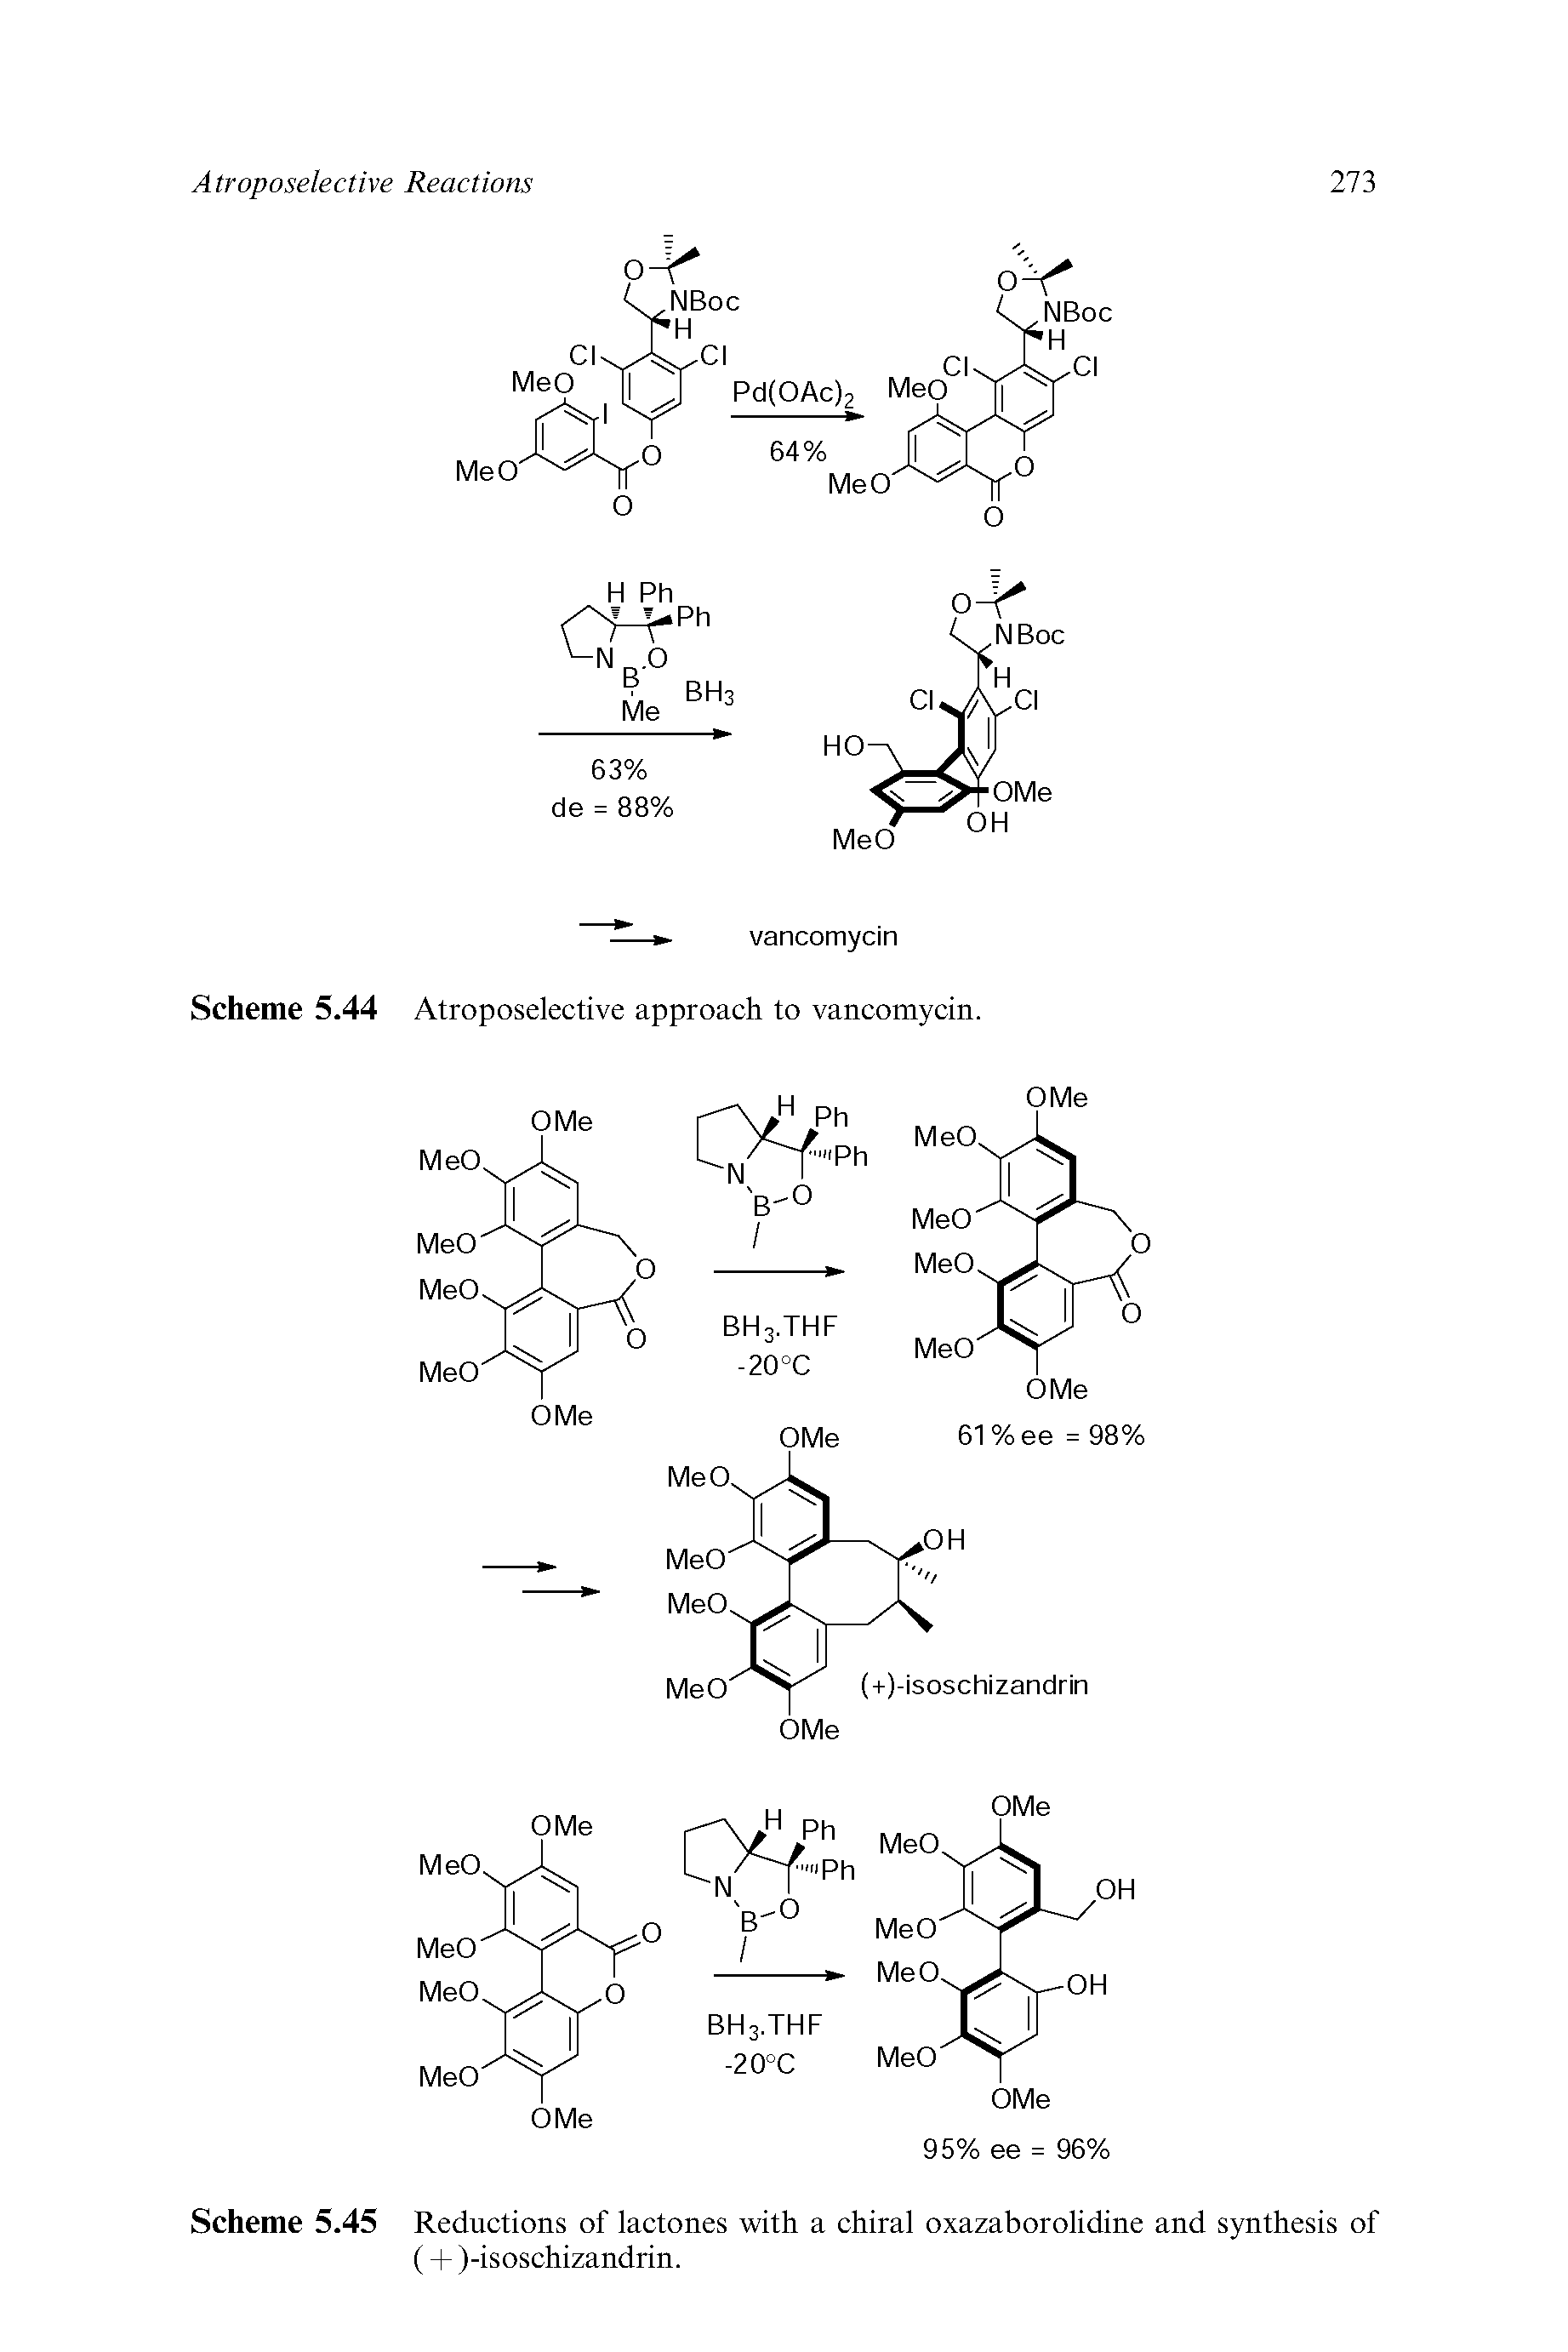 Scheme 5.45 Reductions of lactones with a chiral oxazaborolidine and synthesis of (+ )-isoschizandrin.